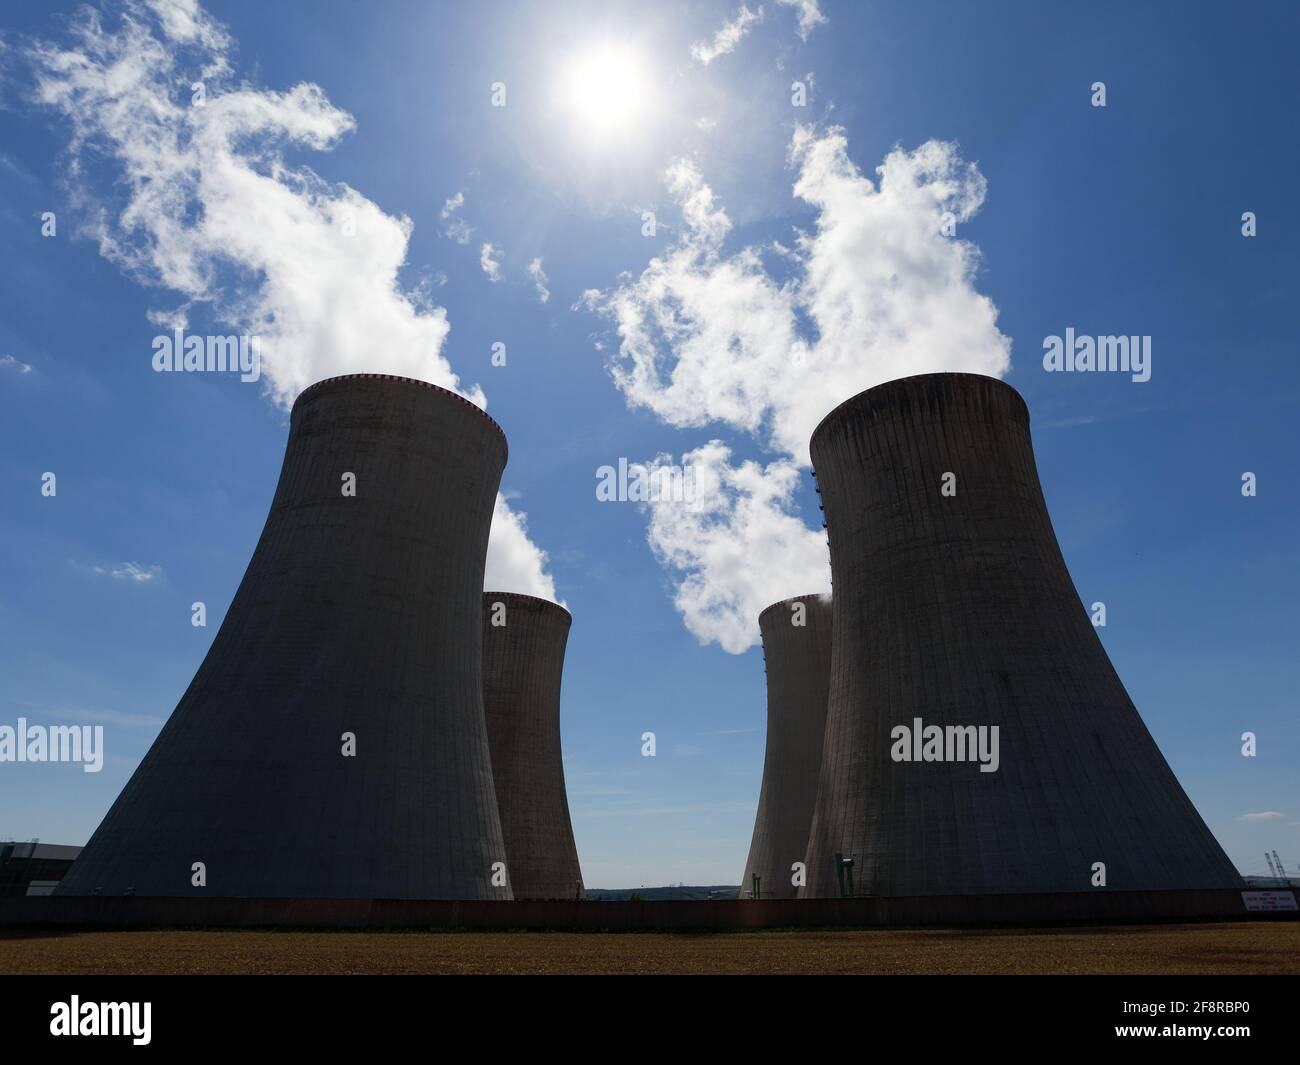 Nuclear power plant Dukovany - cooling towers with contrejour lighting and beautiful sky - Czech Republic Stock Photo